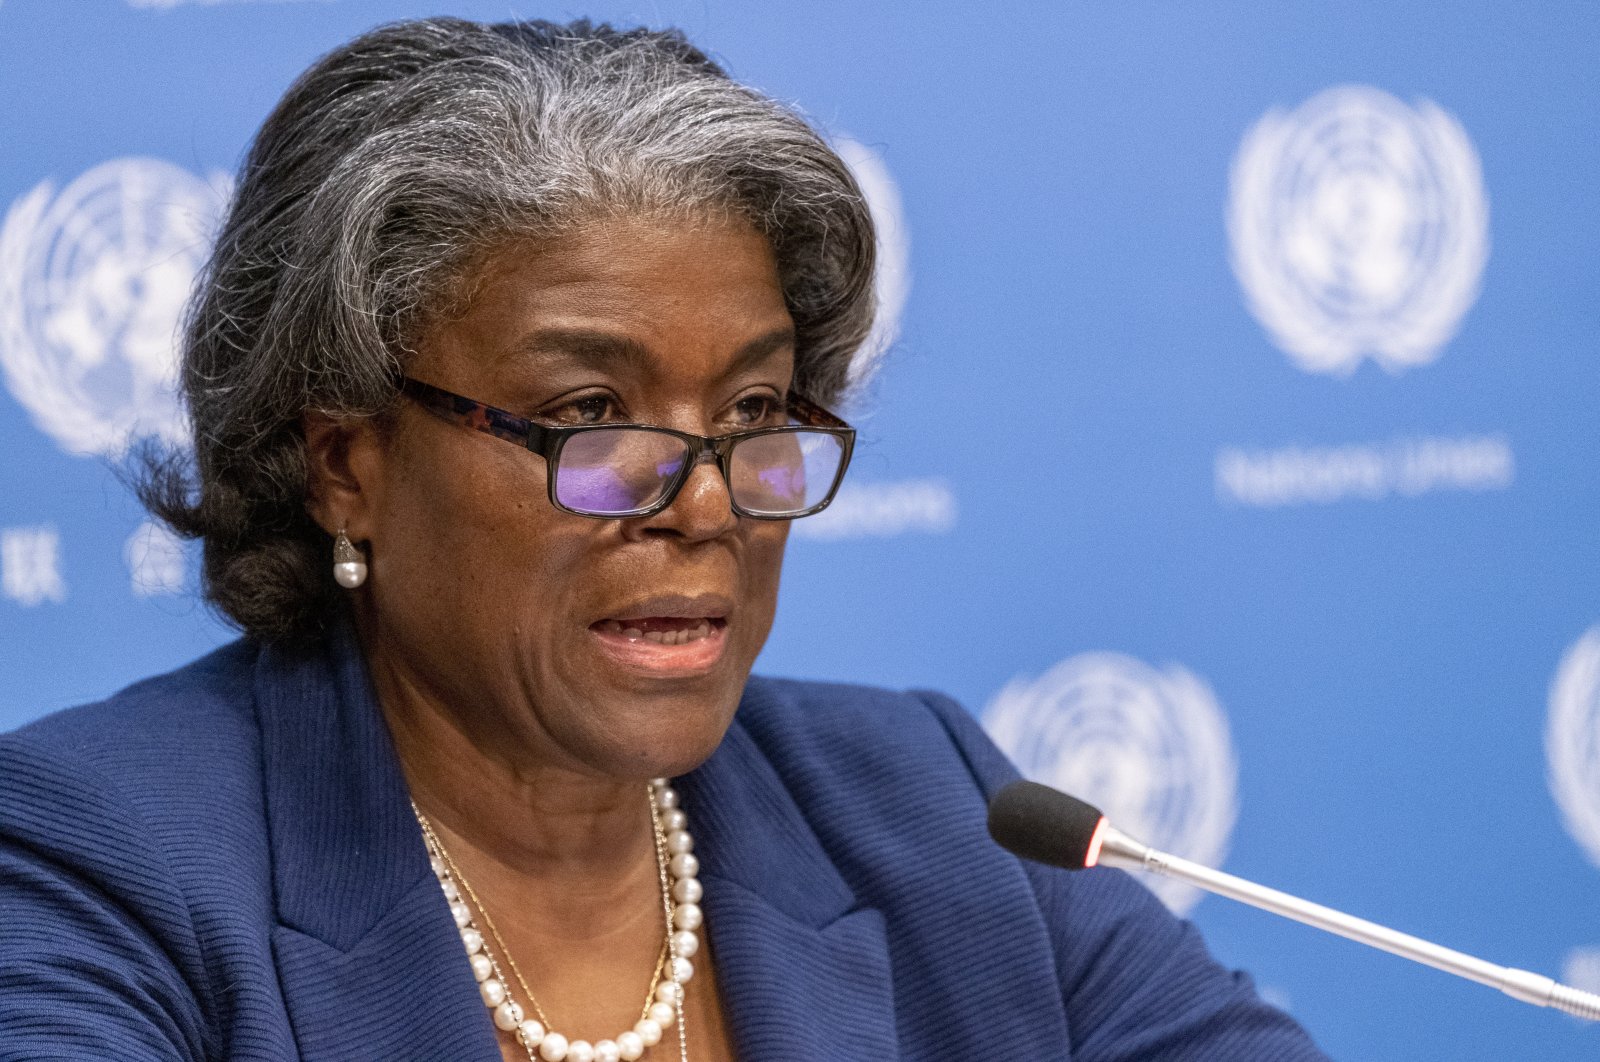 U.S. Ambassador to the United Nations Linda Thomas-Greenfield speaks to reporters during a news conference at United Nations headquarters, New York, U.S., March 1, 2021. (AP Photo)